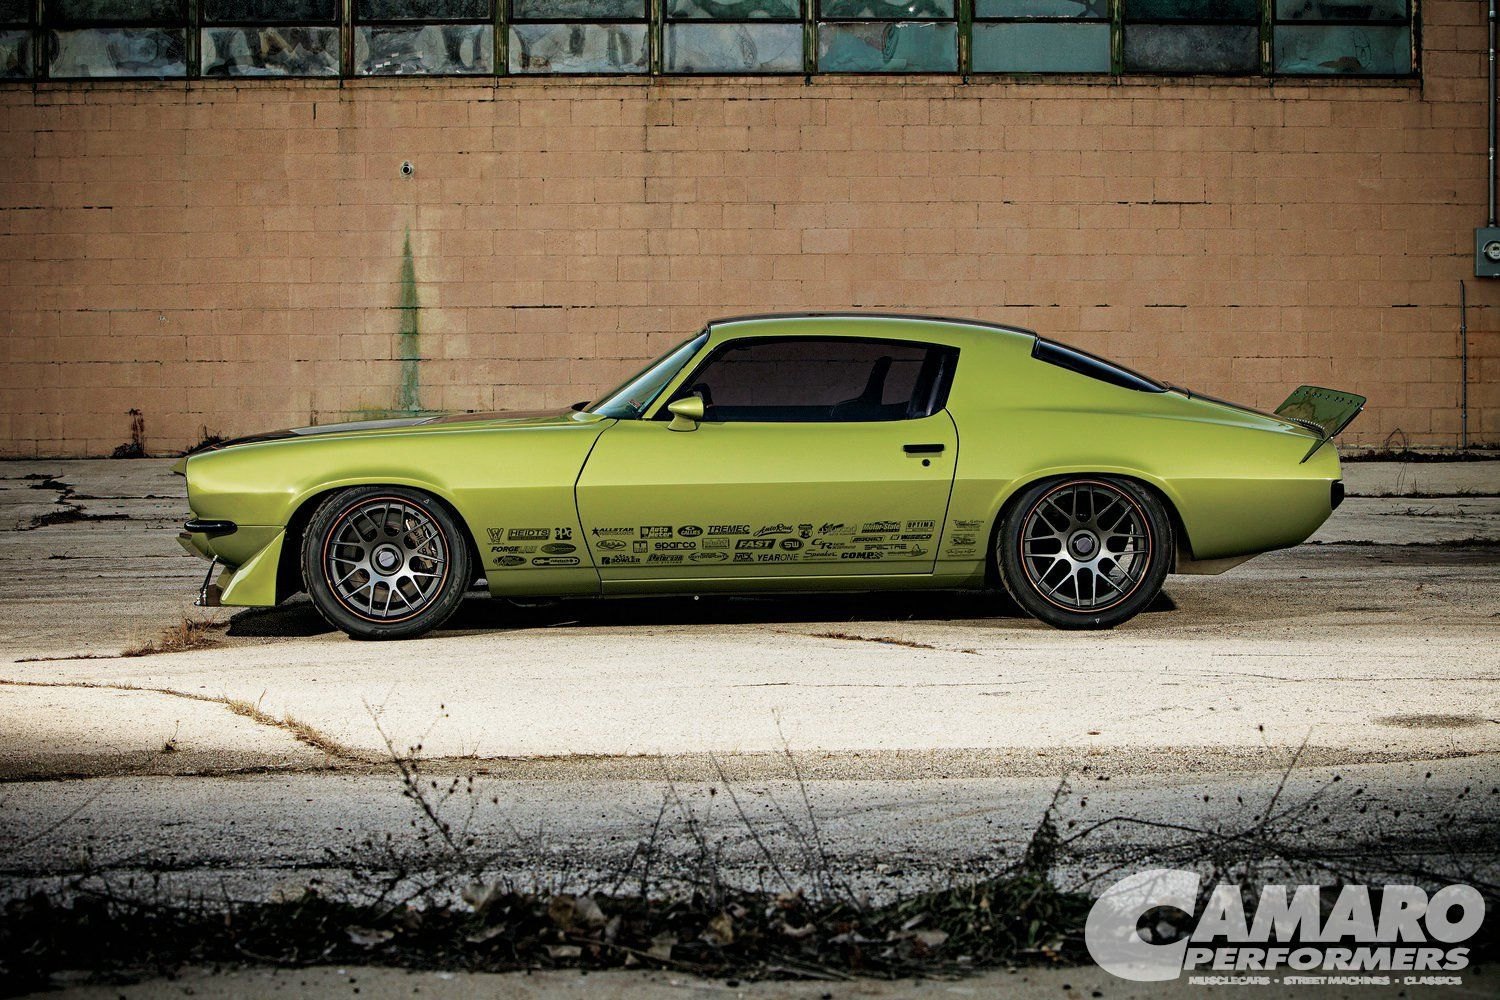 Green Debadged Chevy Camaro with Gunmetal Forgeline Rims - Photo by Forgeline Motorsports